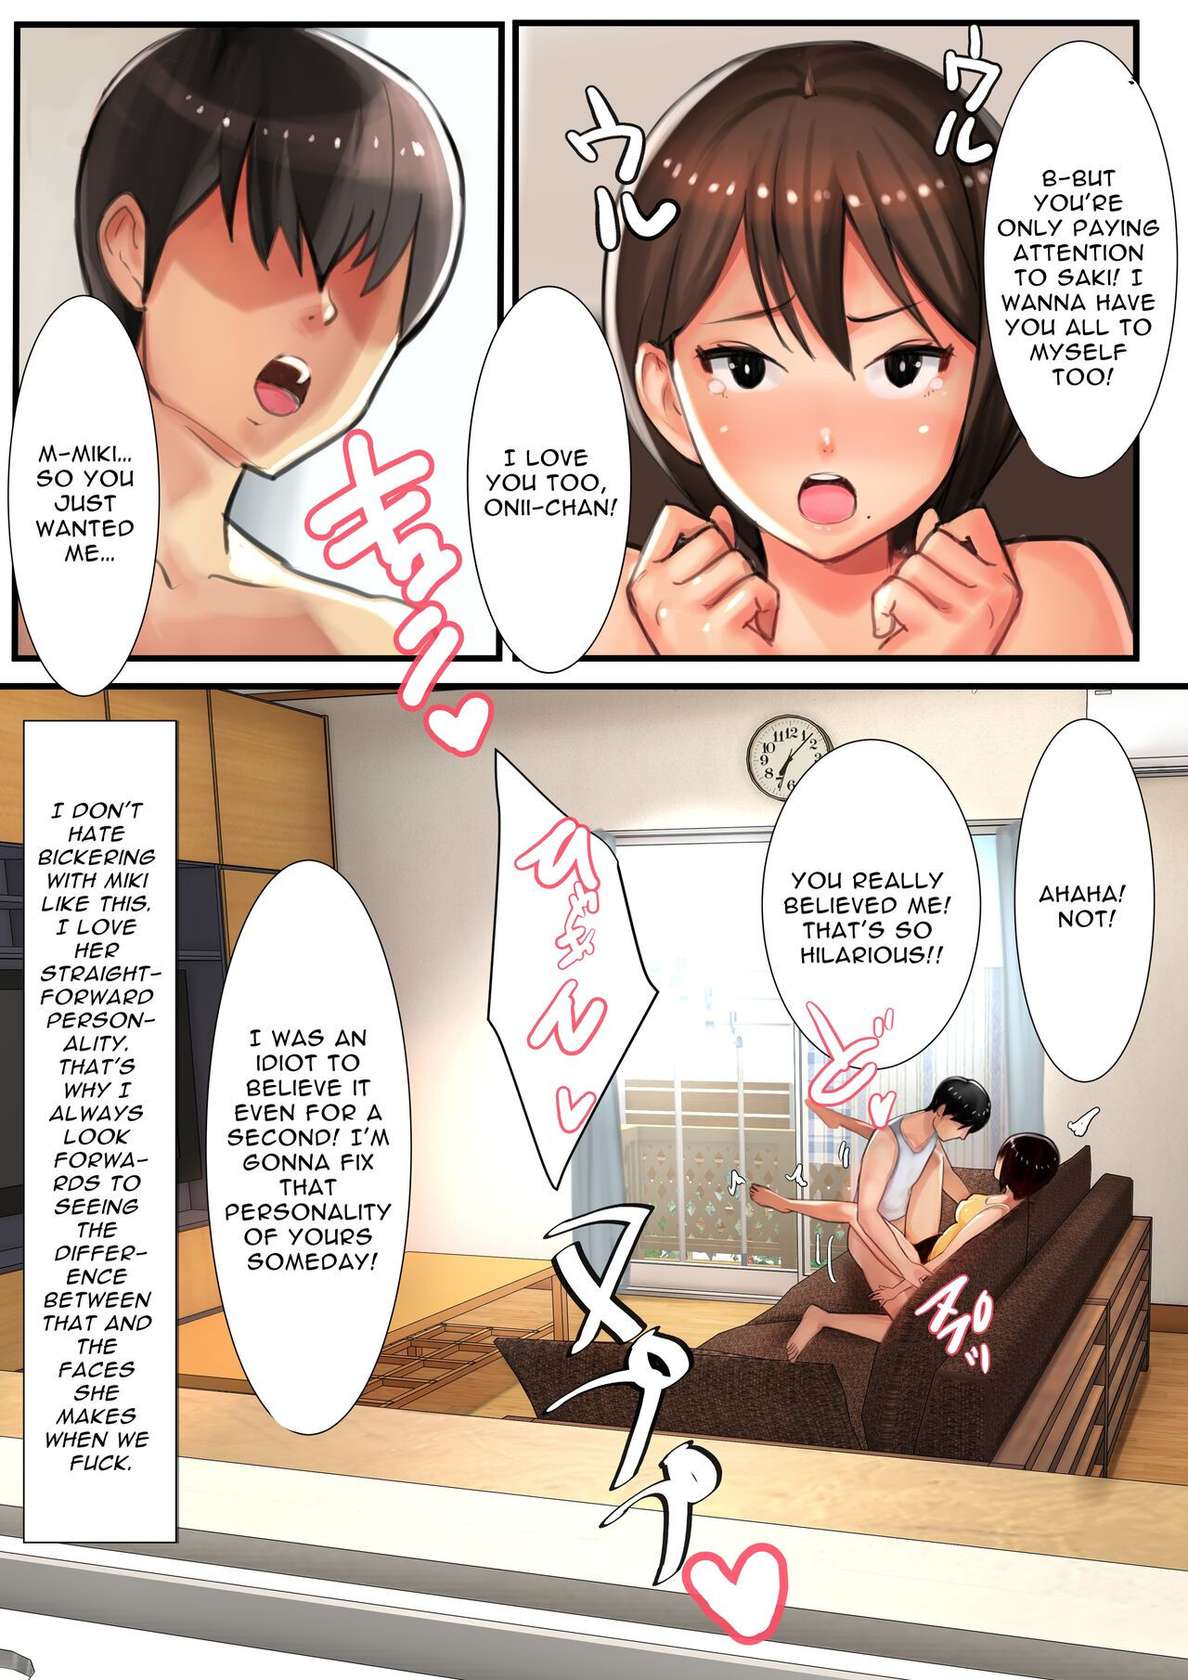 [Ama Natsuna] Ani x 4 Shimai no Nichijou | The Daily Lives of an Older Brother x 4 Younger Sisters [English] [Selcouth]